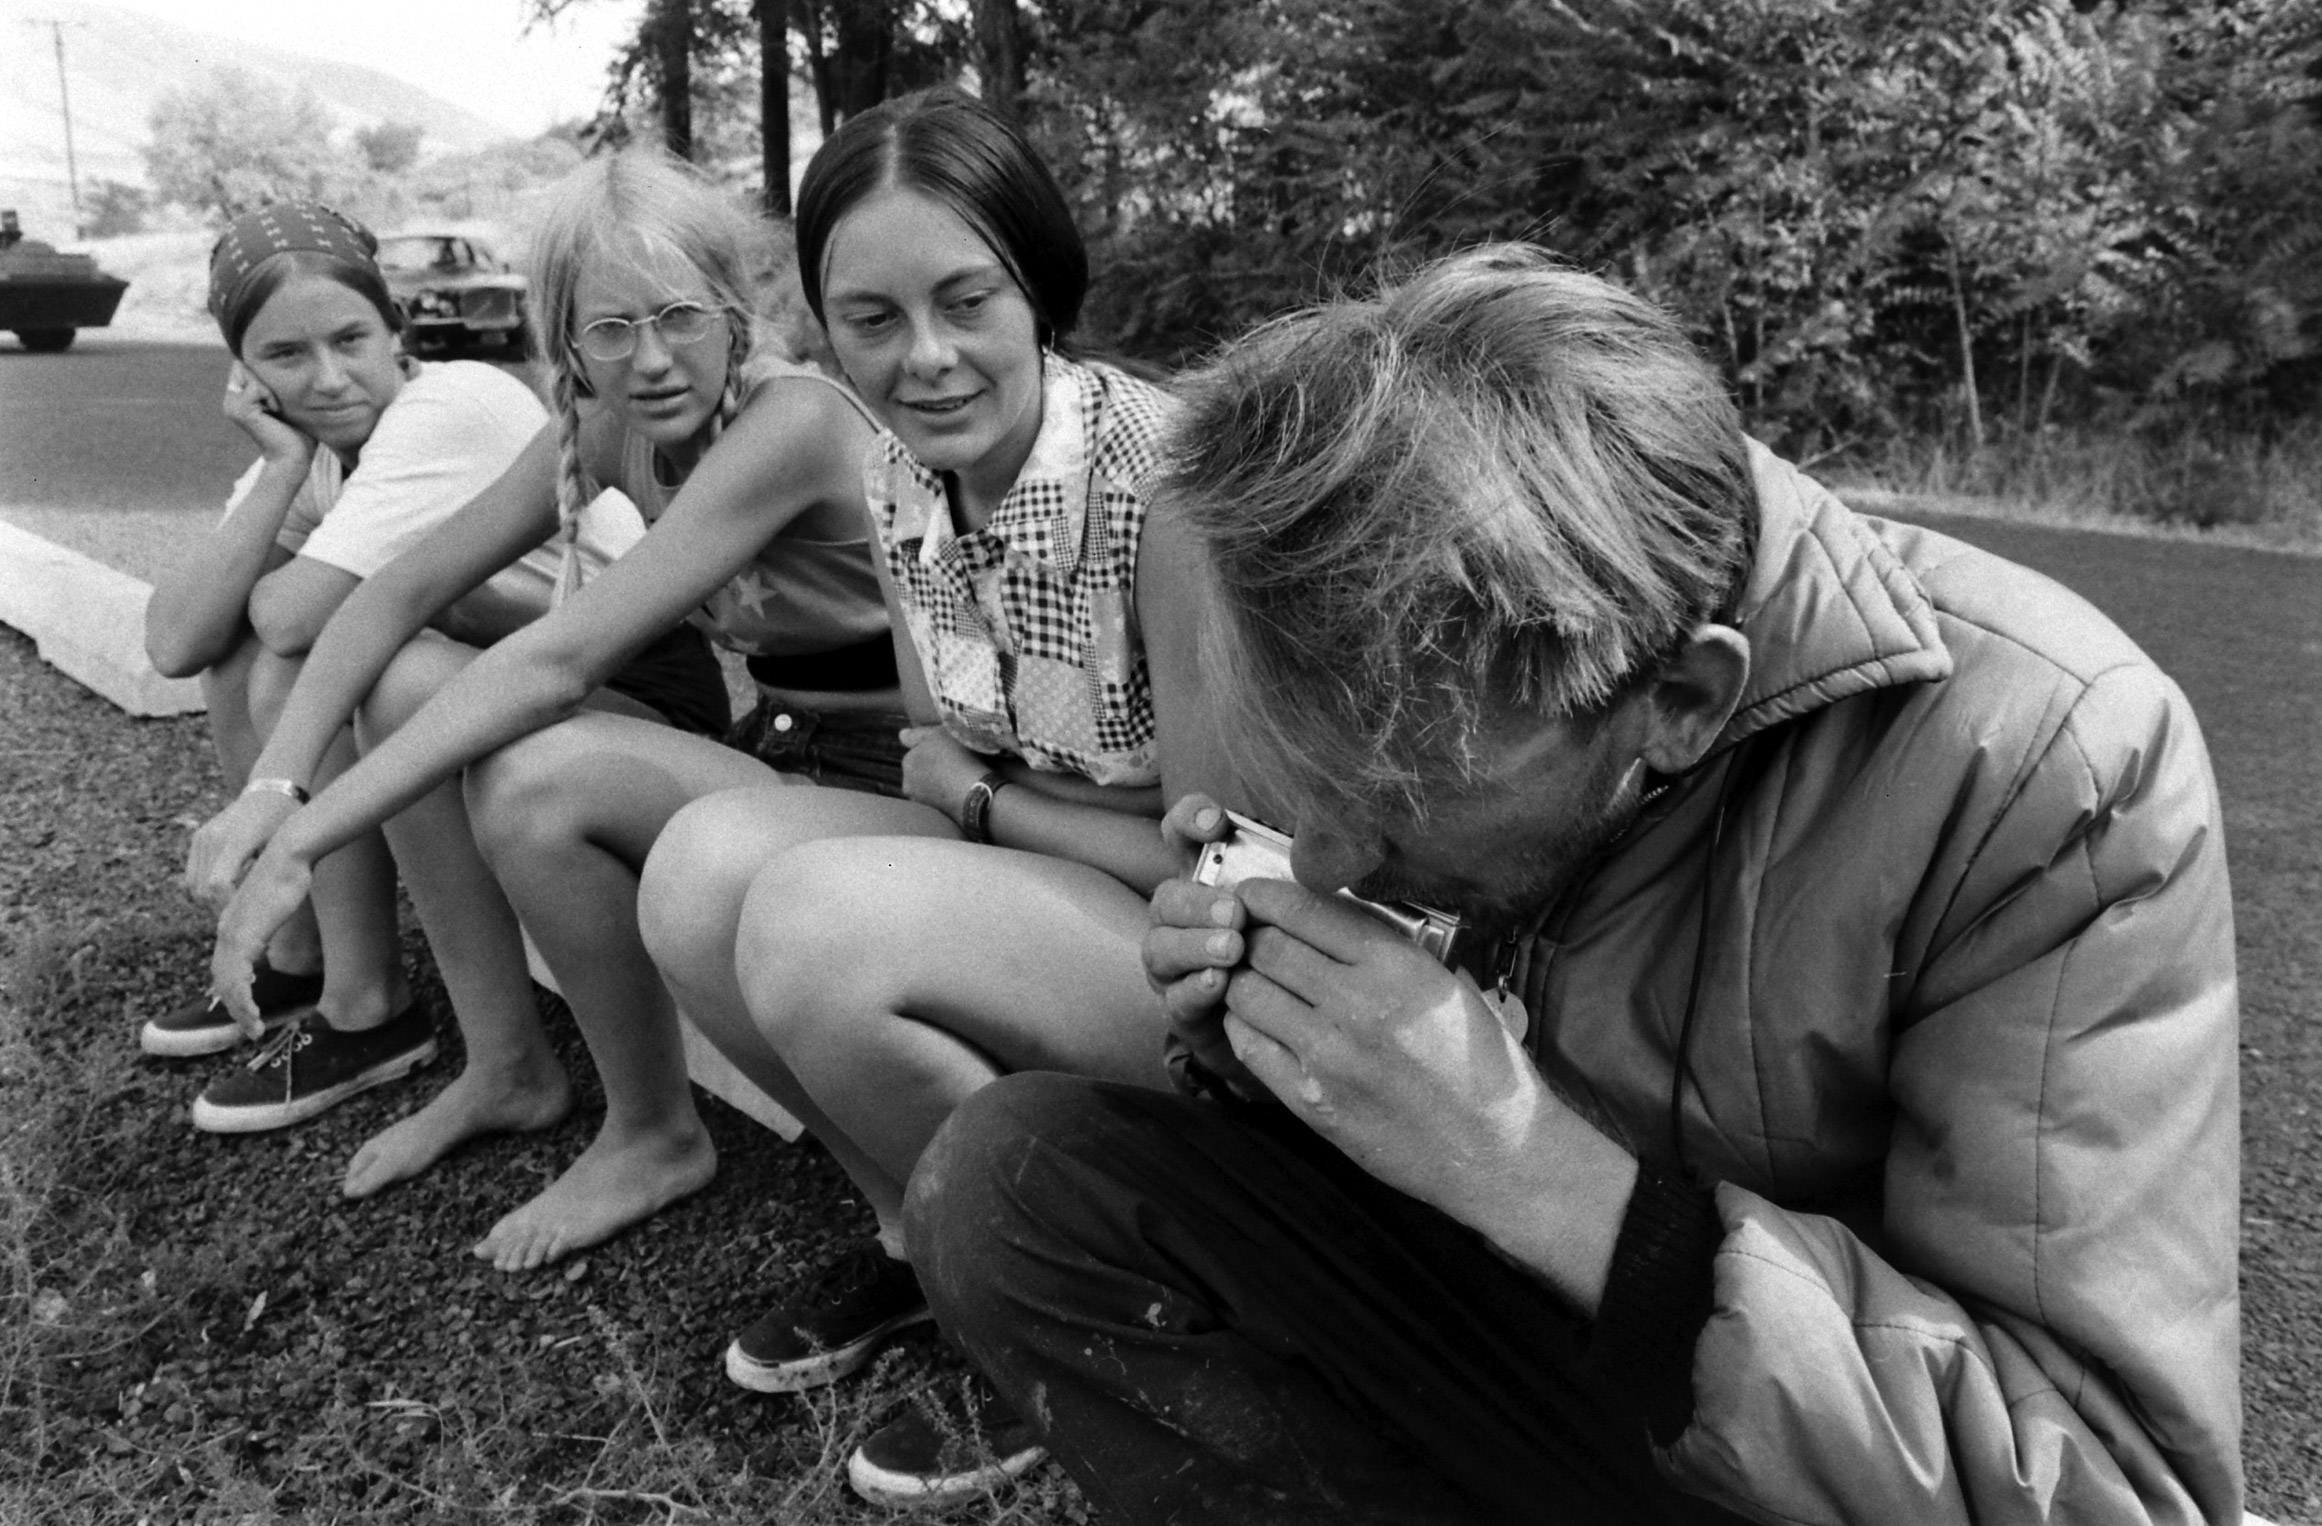 Mental patients camping in Oregon in 1972.